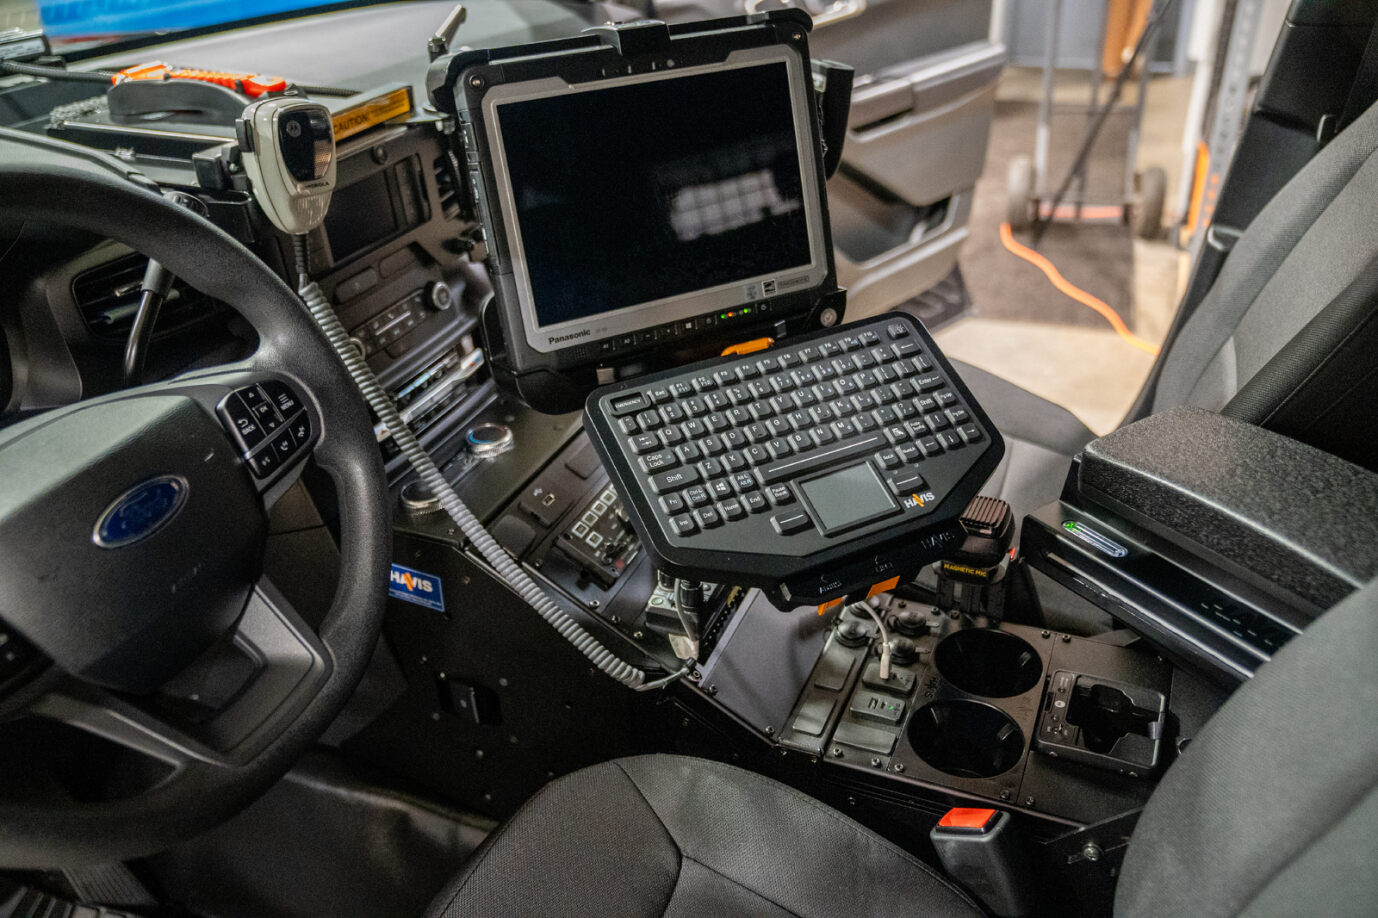 rugged laptop in console of police vehicle